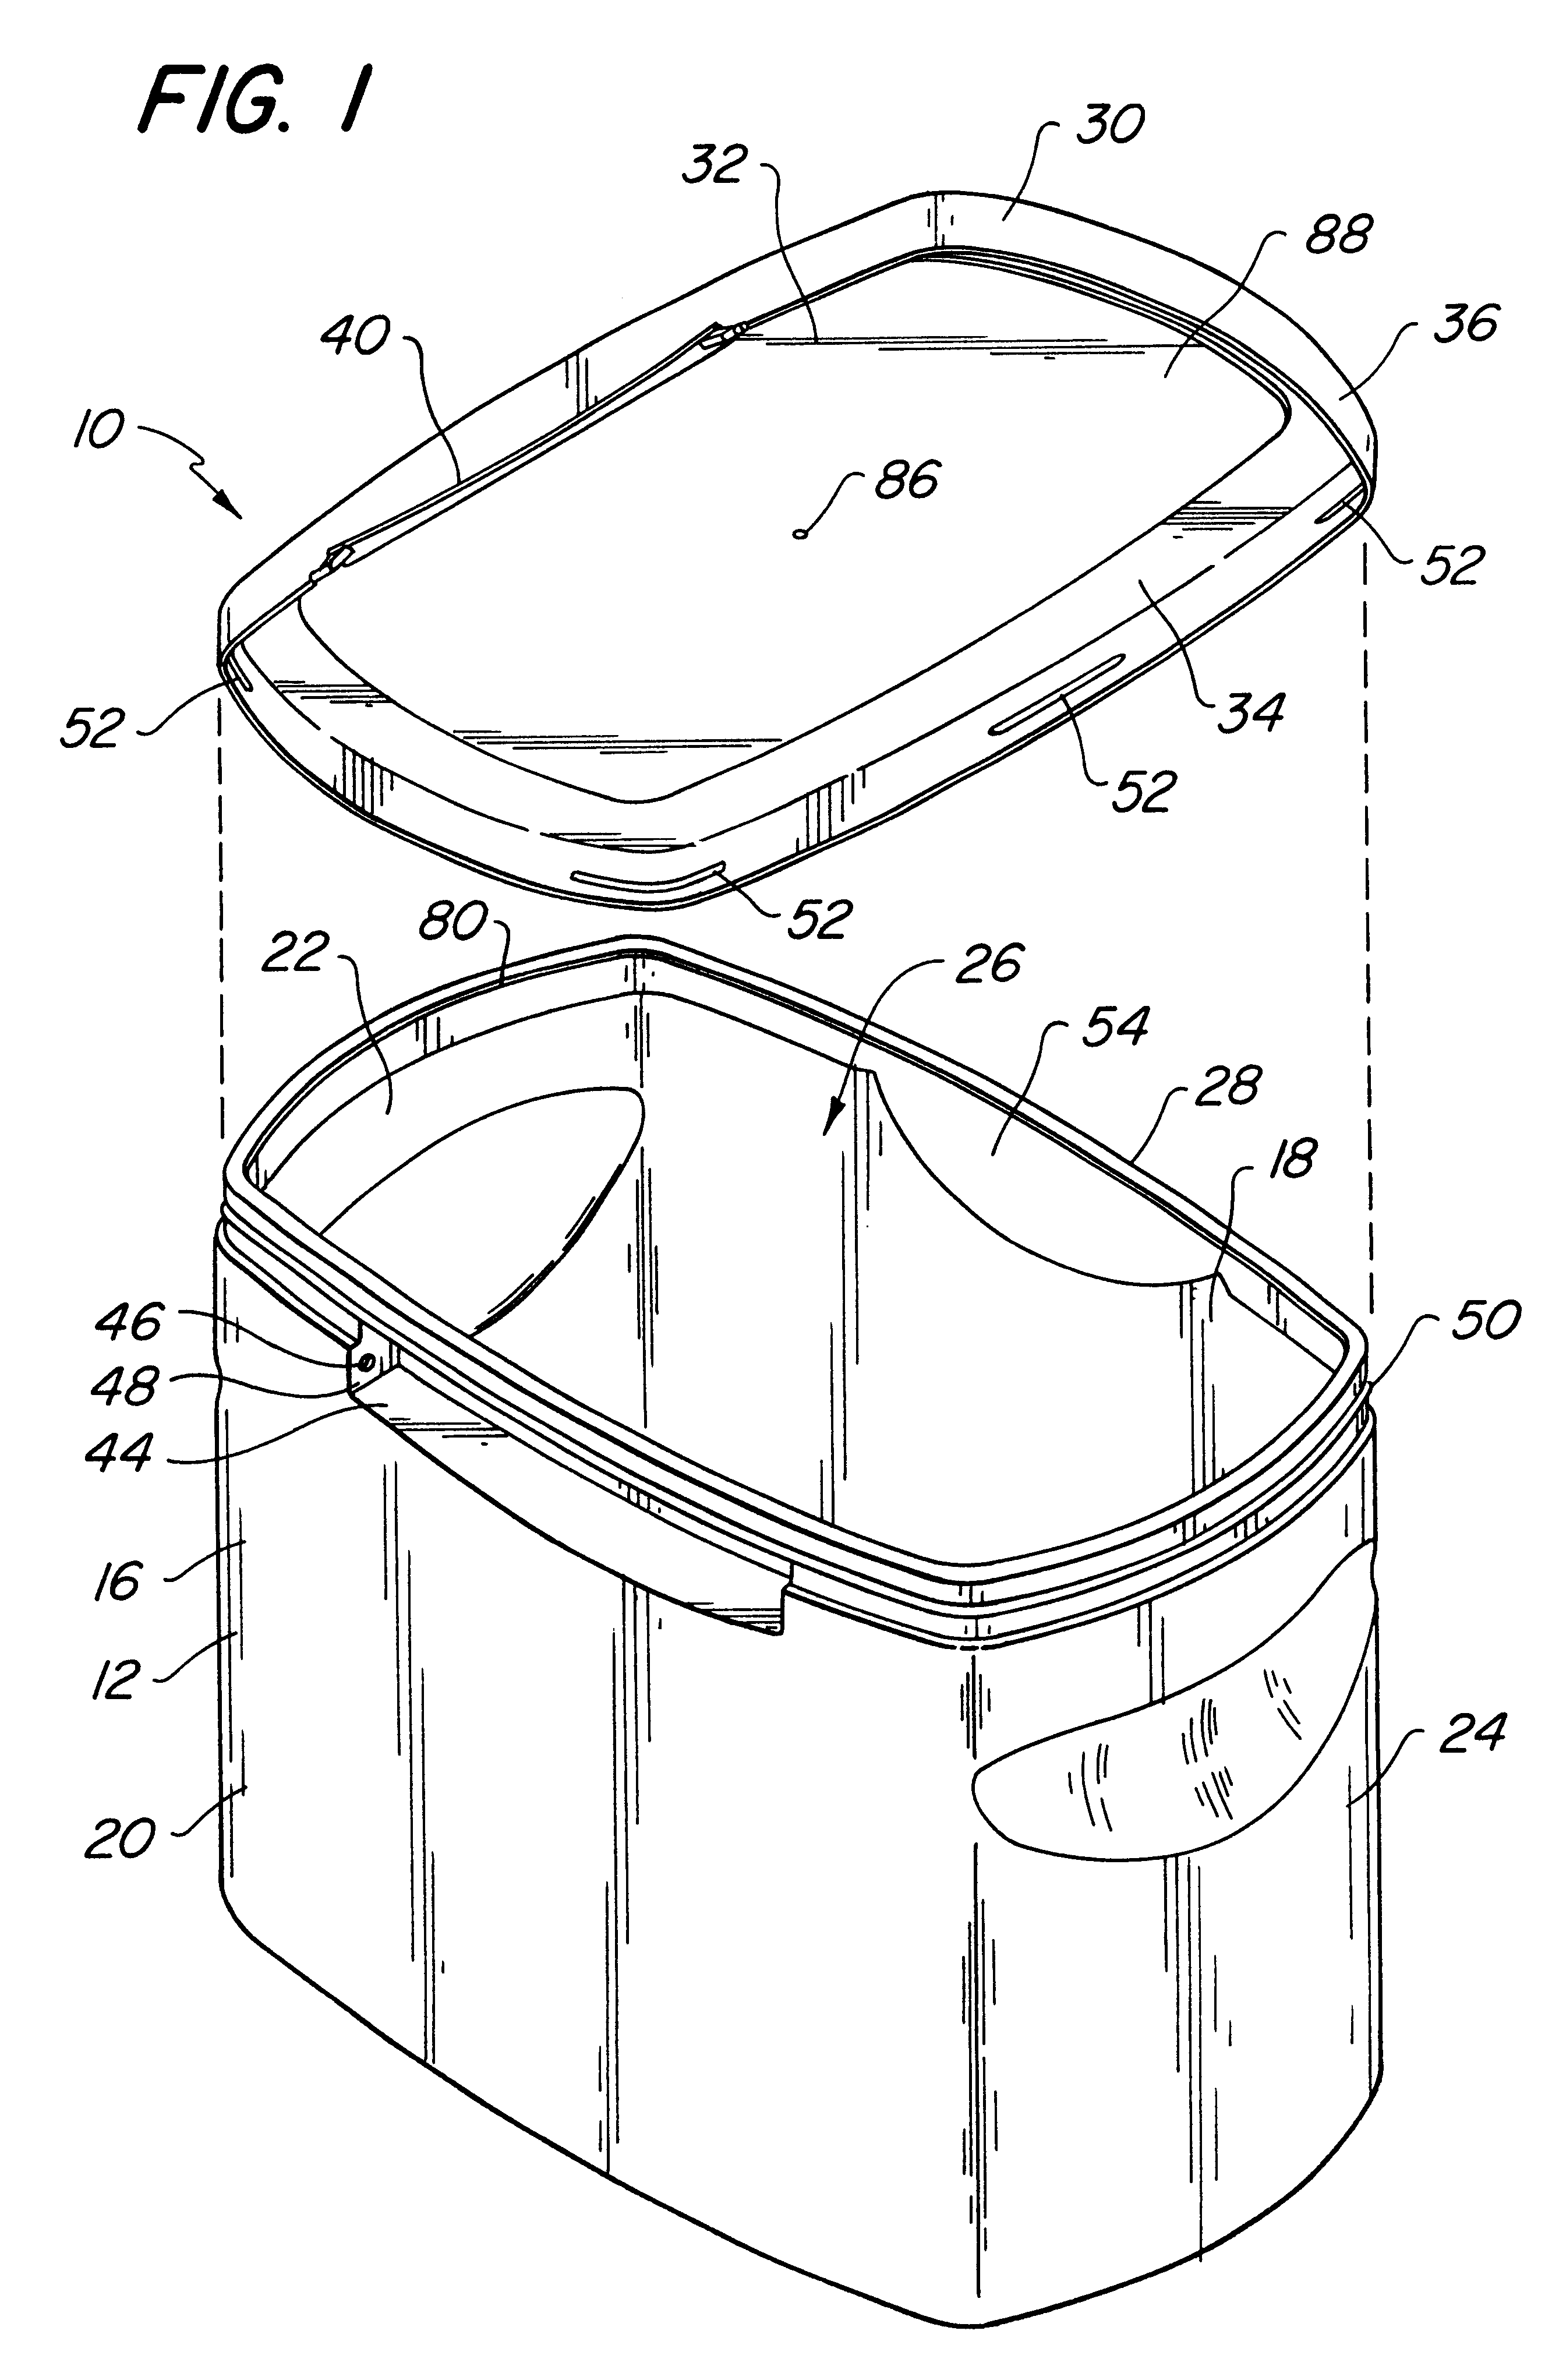 Blow-molded container and closure, and method and apparatus for making same